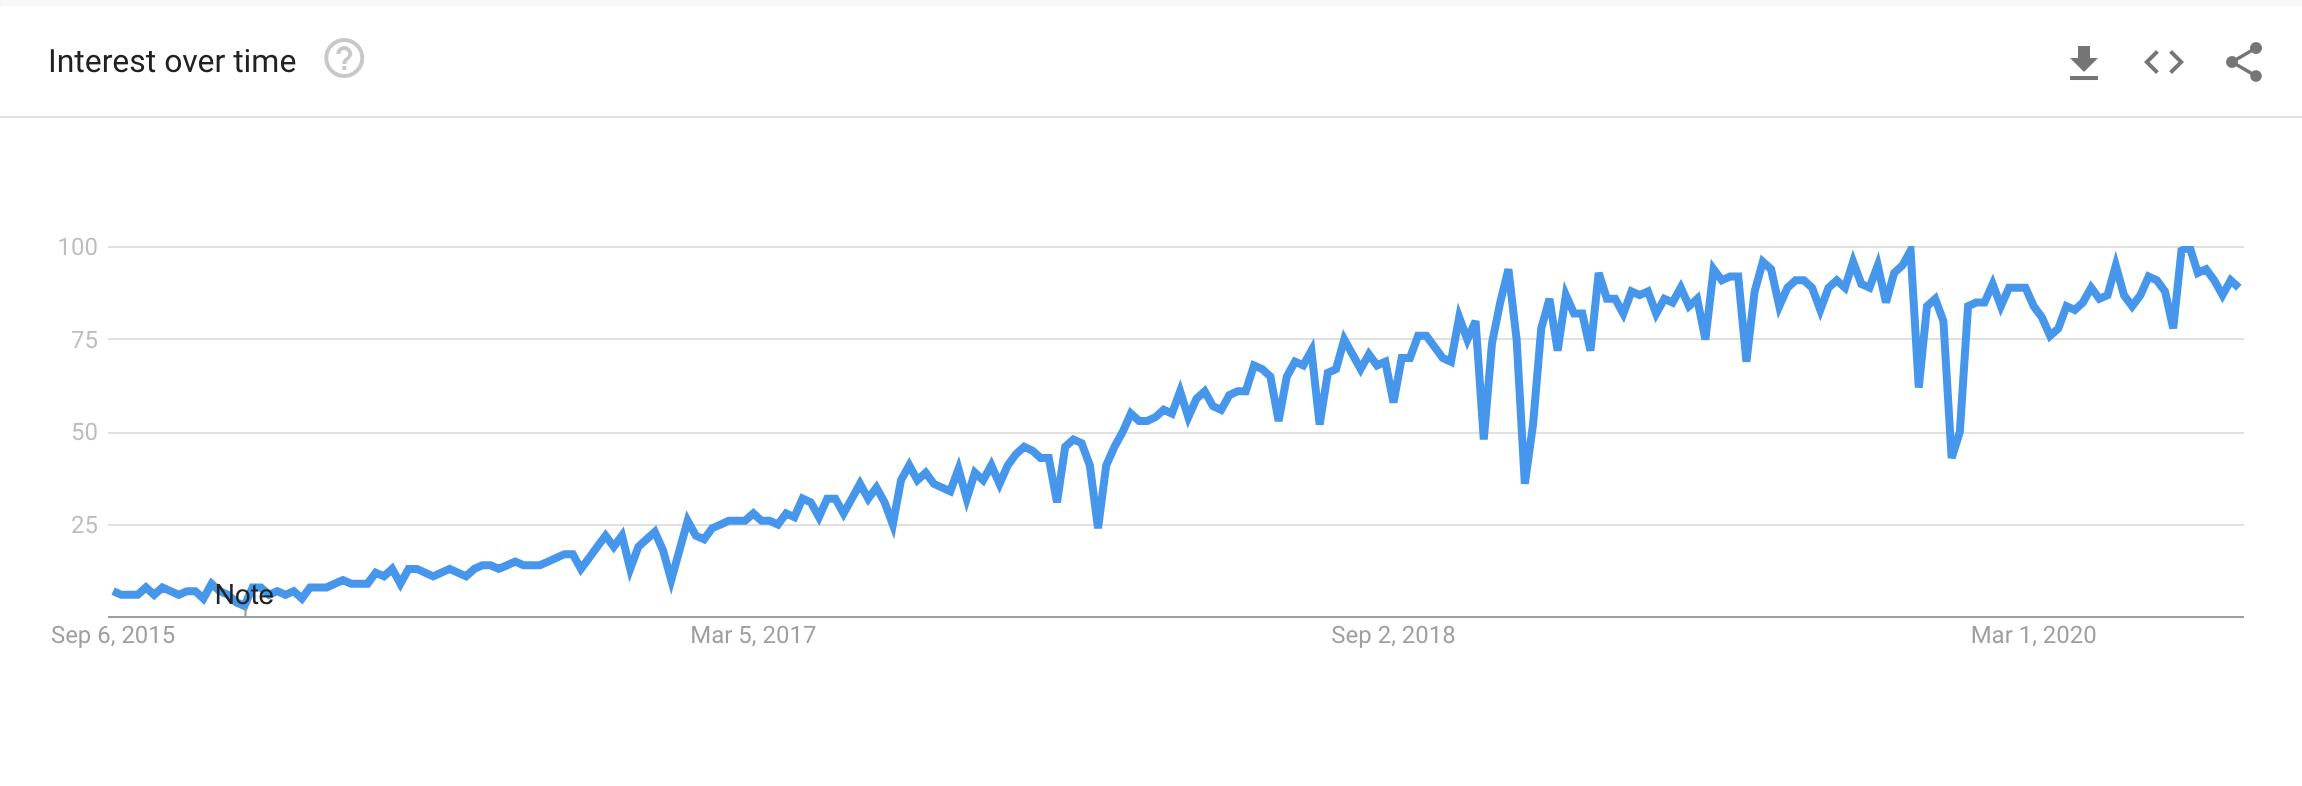 Kubernetes trends for the last 5 years